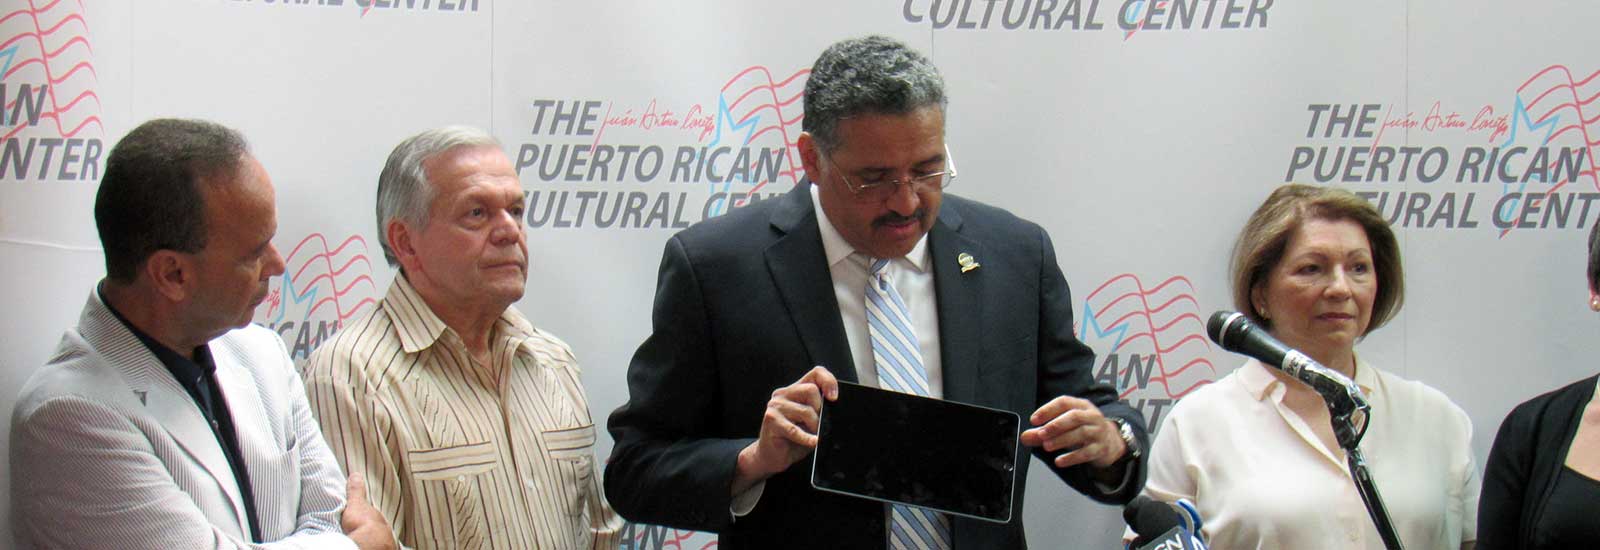 HITN Visits Chicago to Support Fiesta Boricua 2018 and Donates 100 iPads